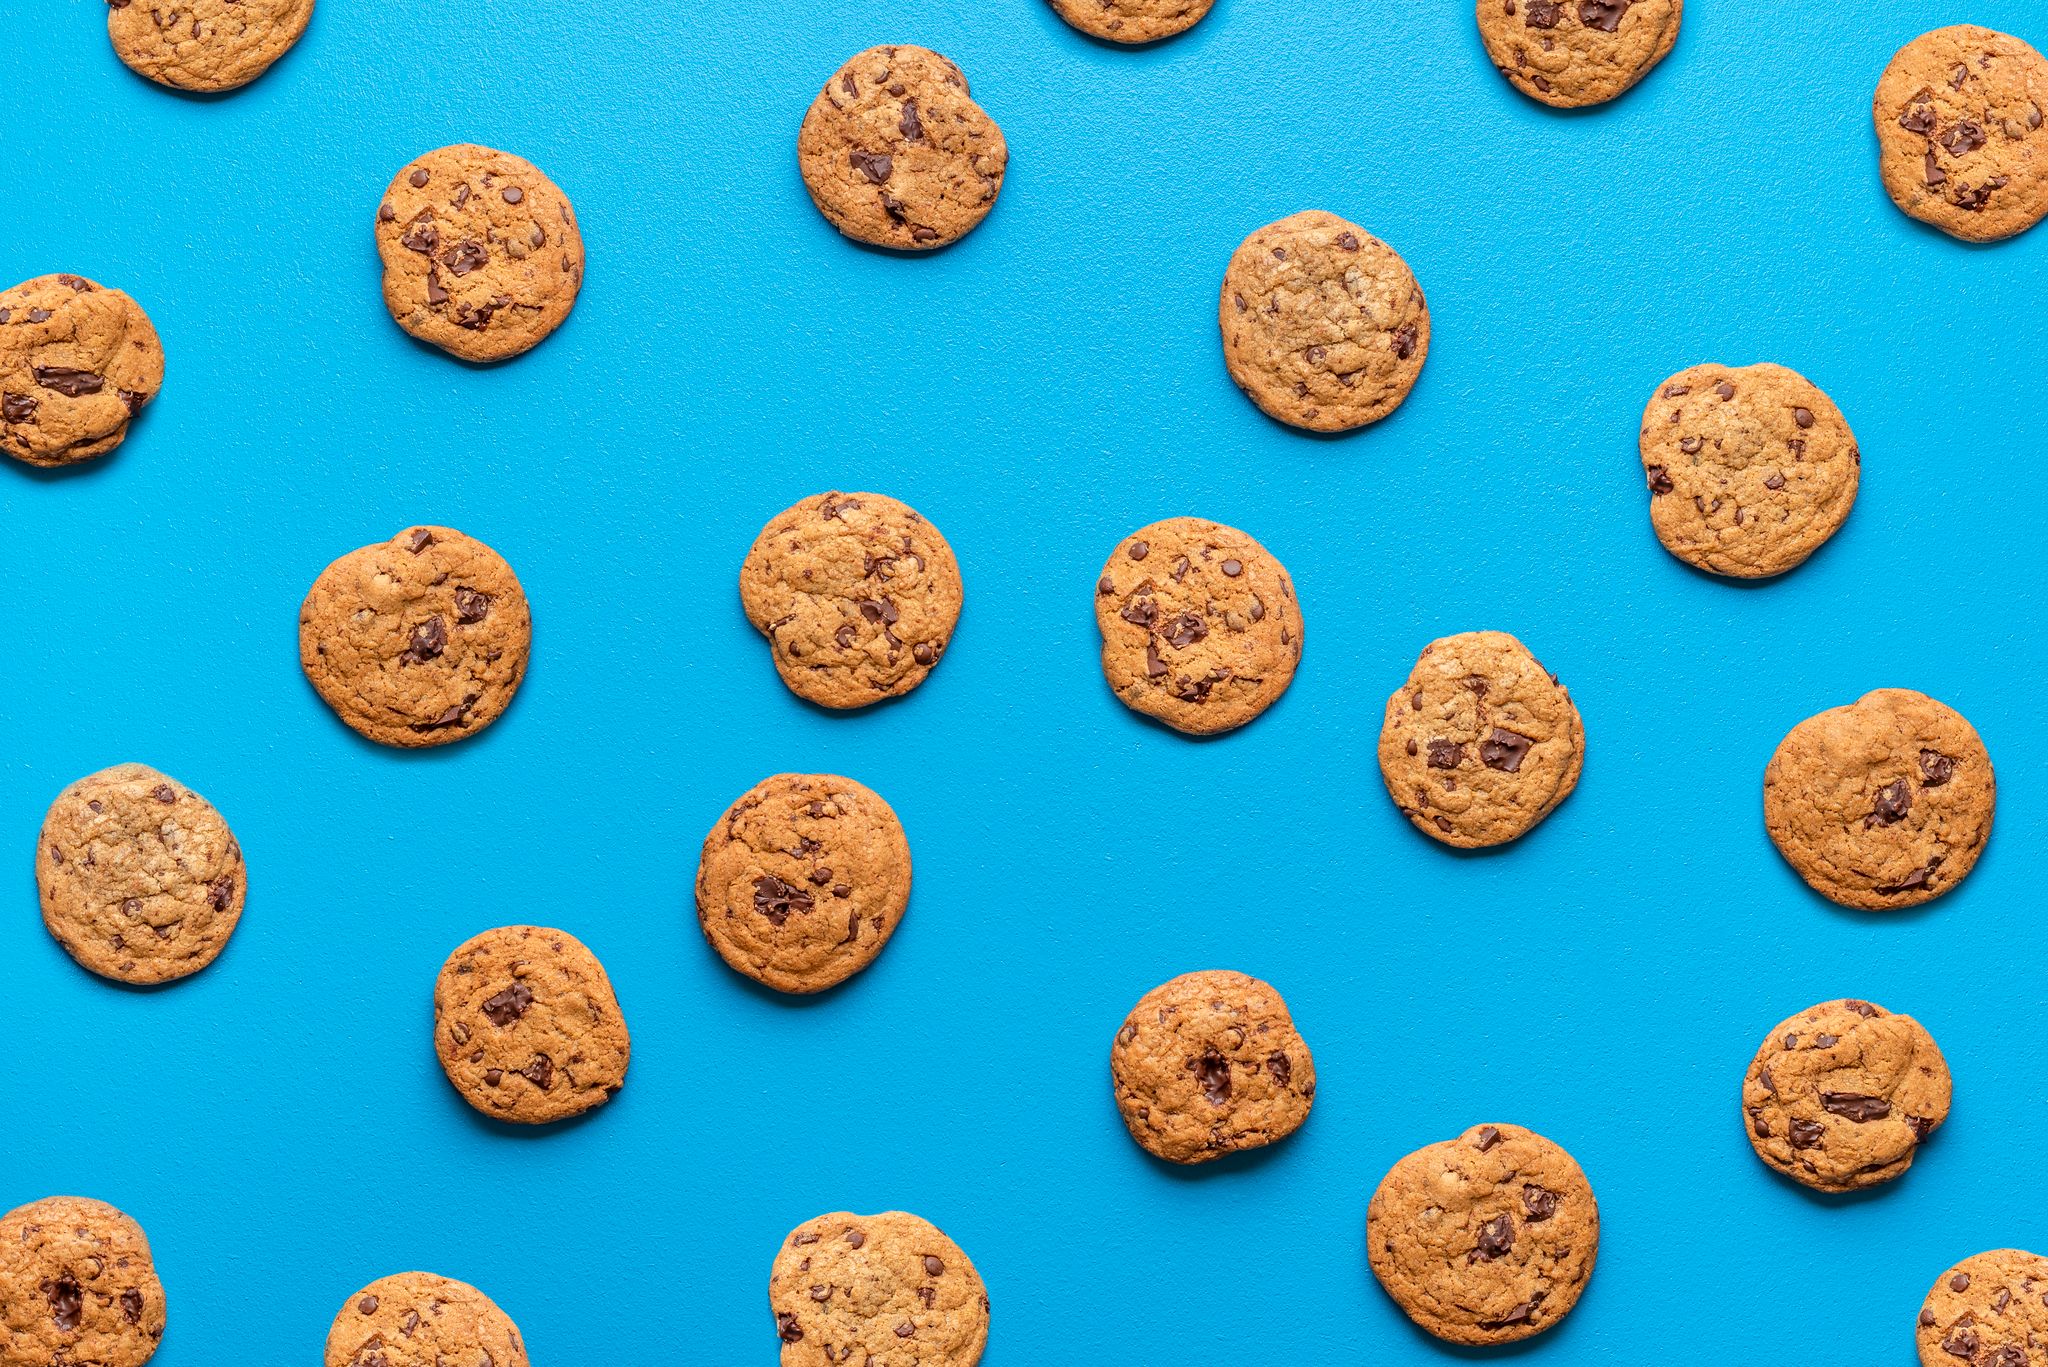 National Chocolate Chip Cookies Day